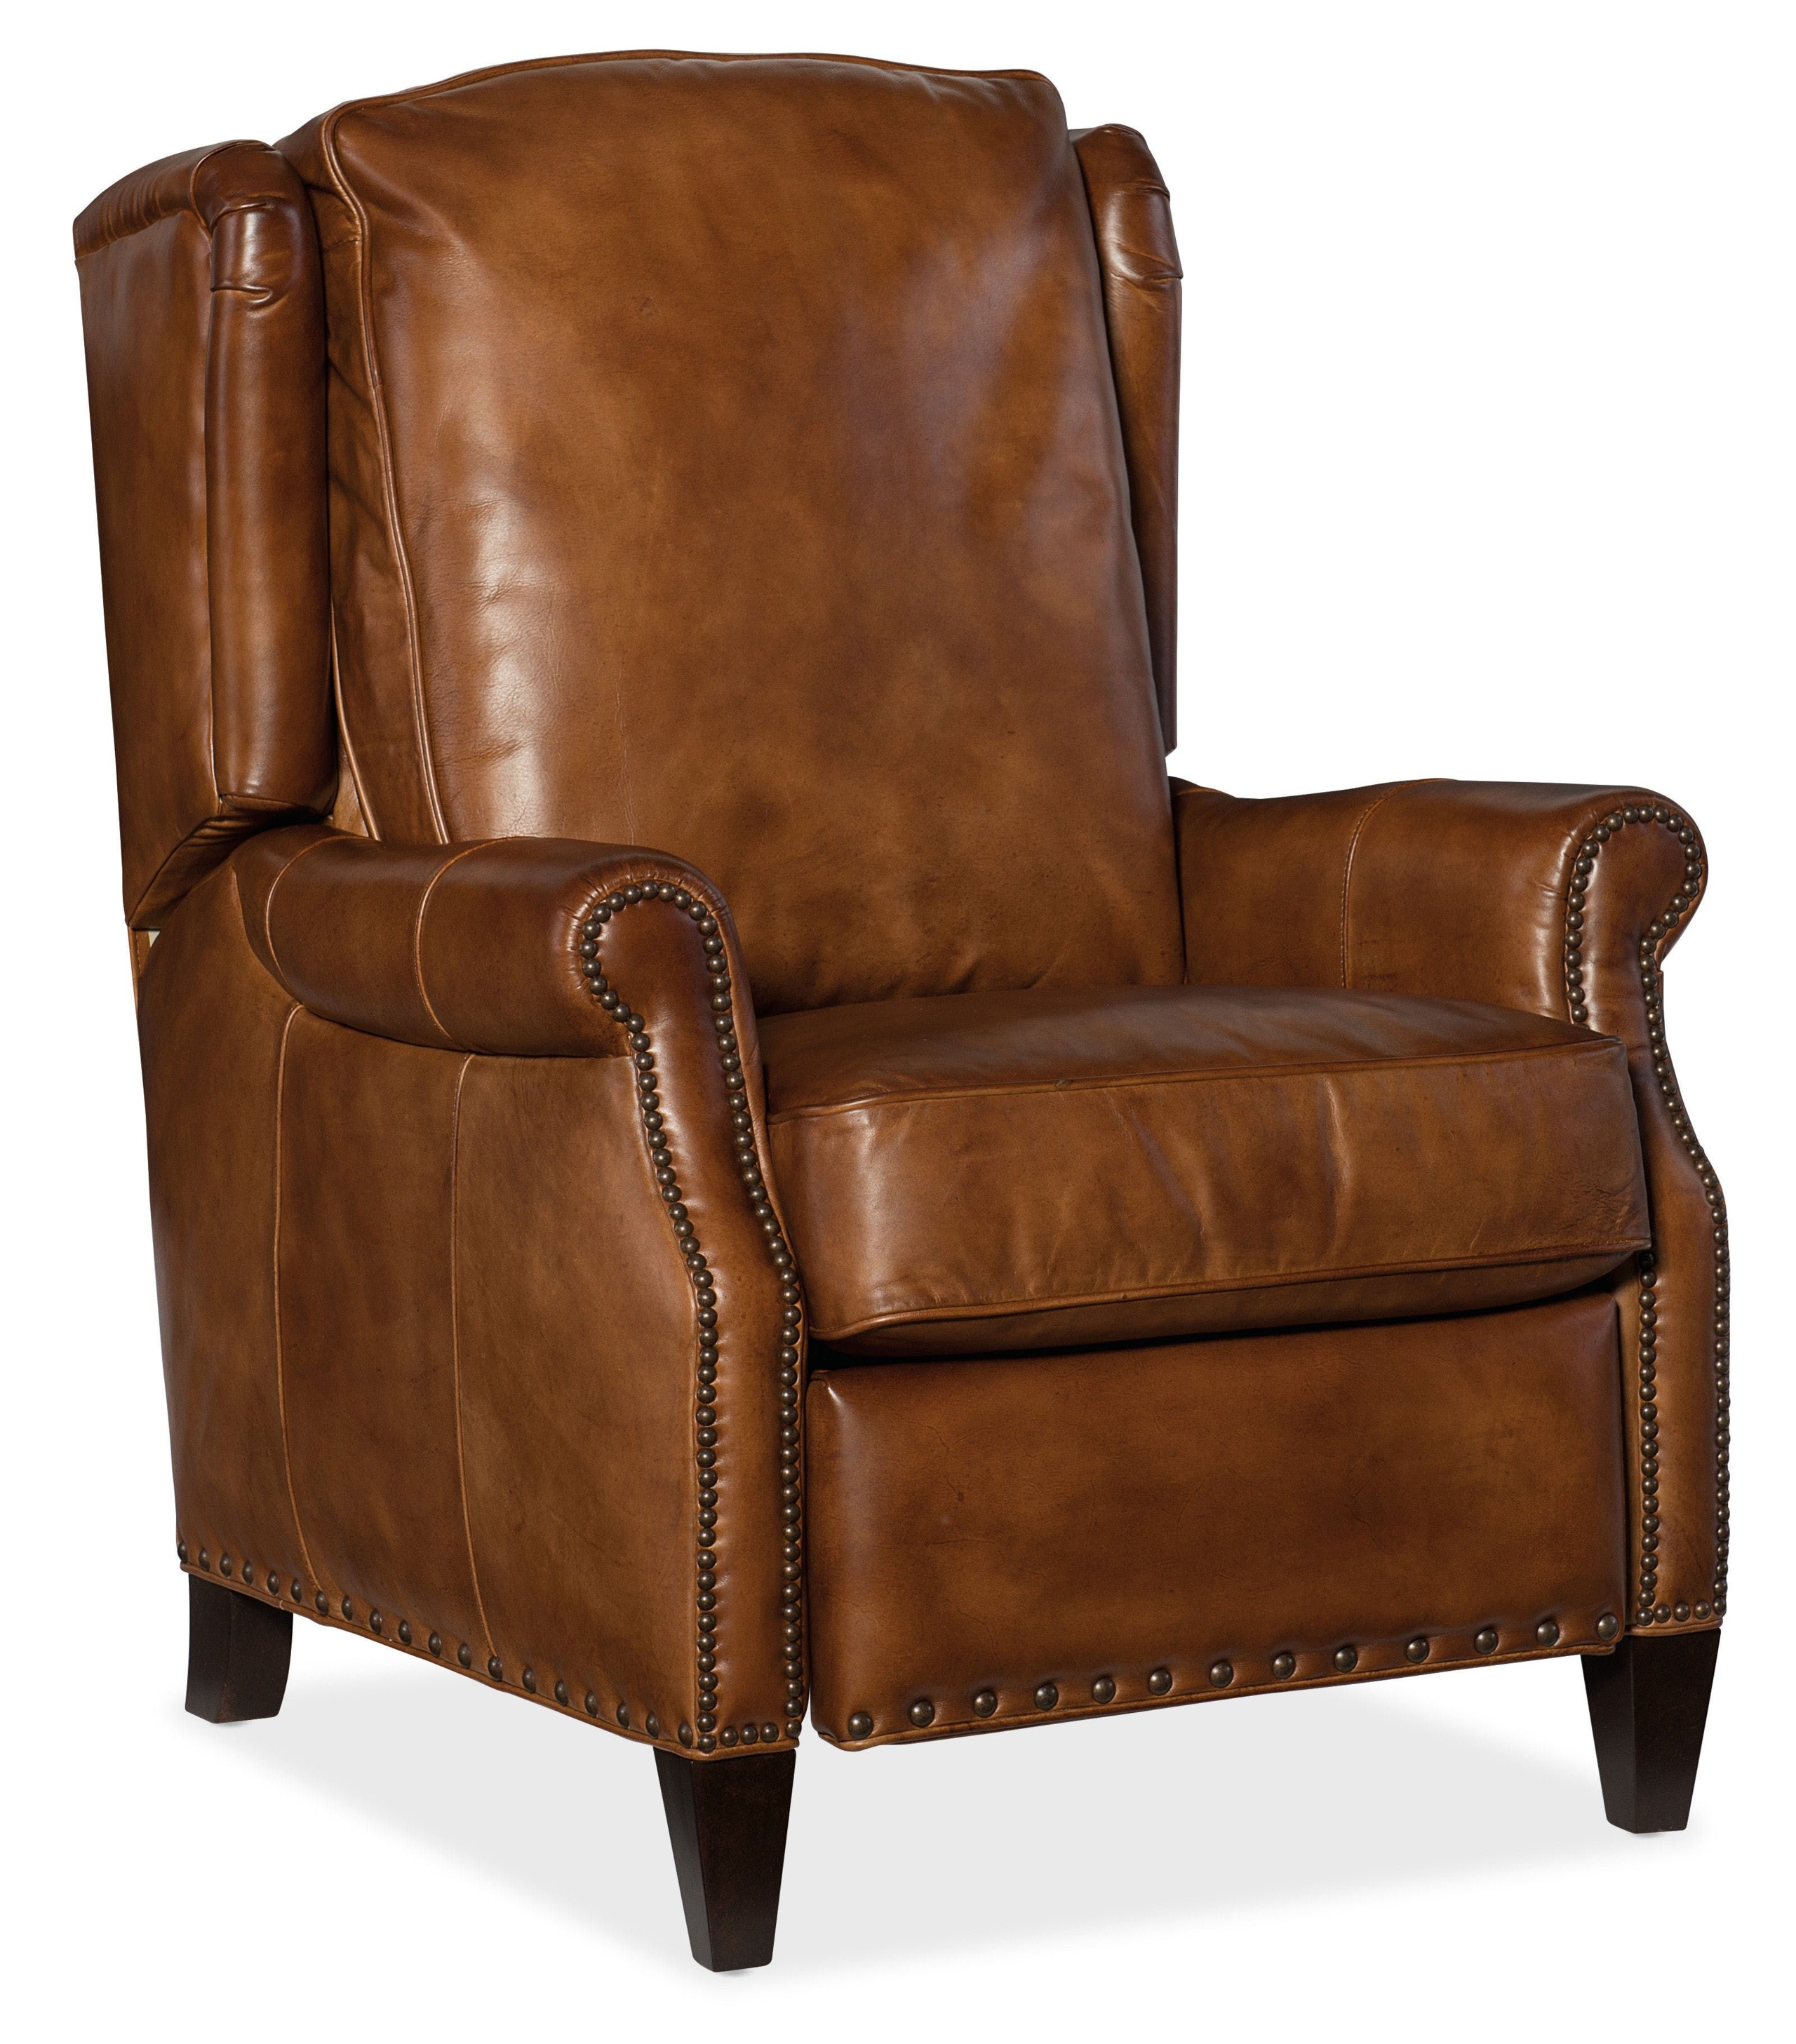 Top Grain Leather Recliner Visualhunt, Genuine Leather Recliner Chair